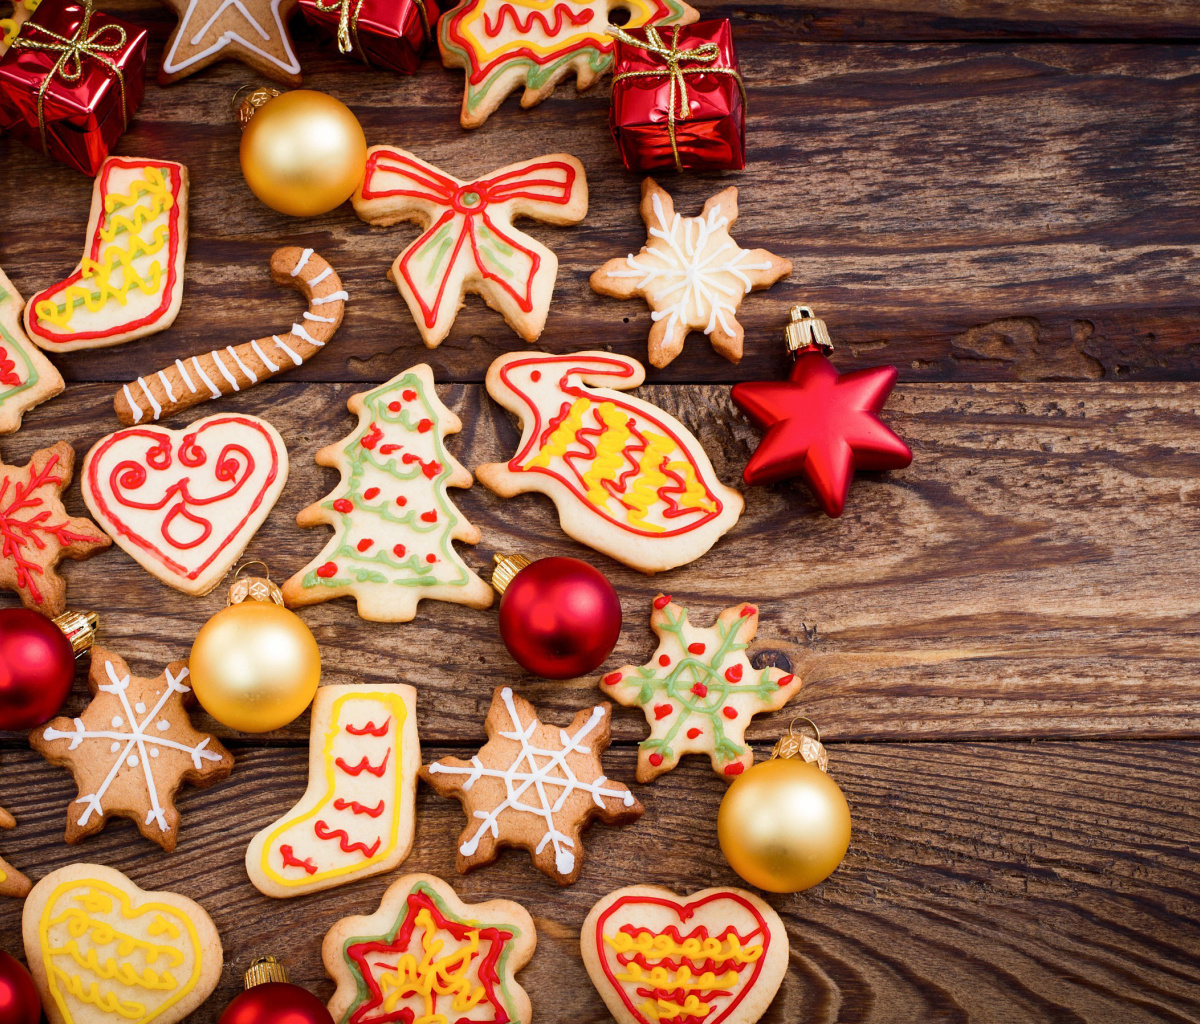 Das Christmas Decorations Cookies and Balls Wallpaper 1200x1024